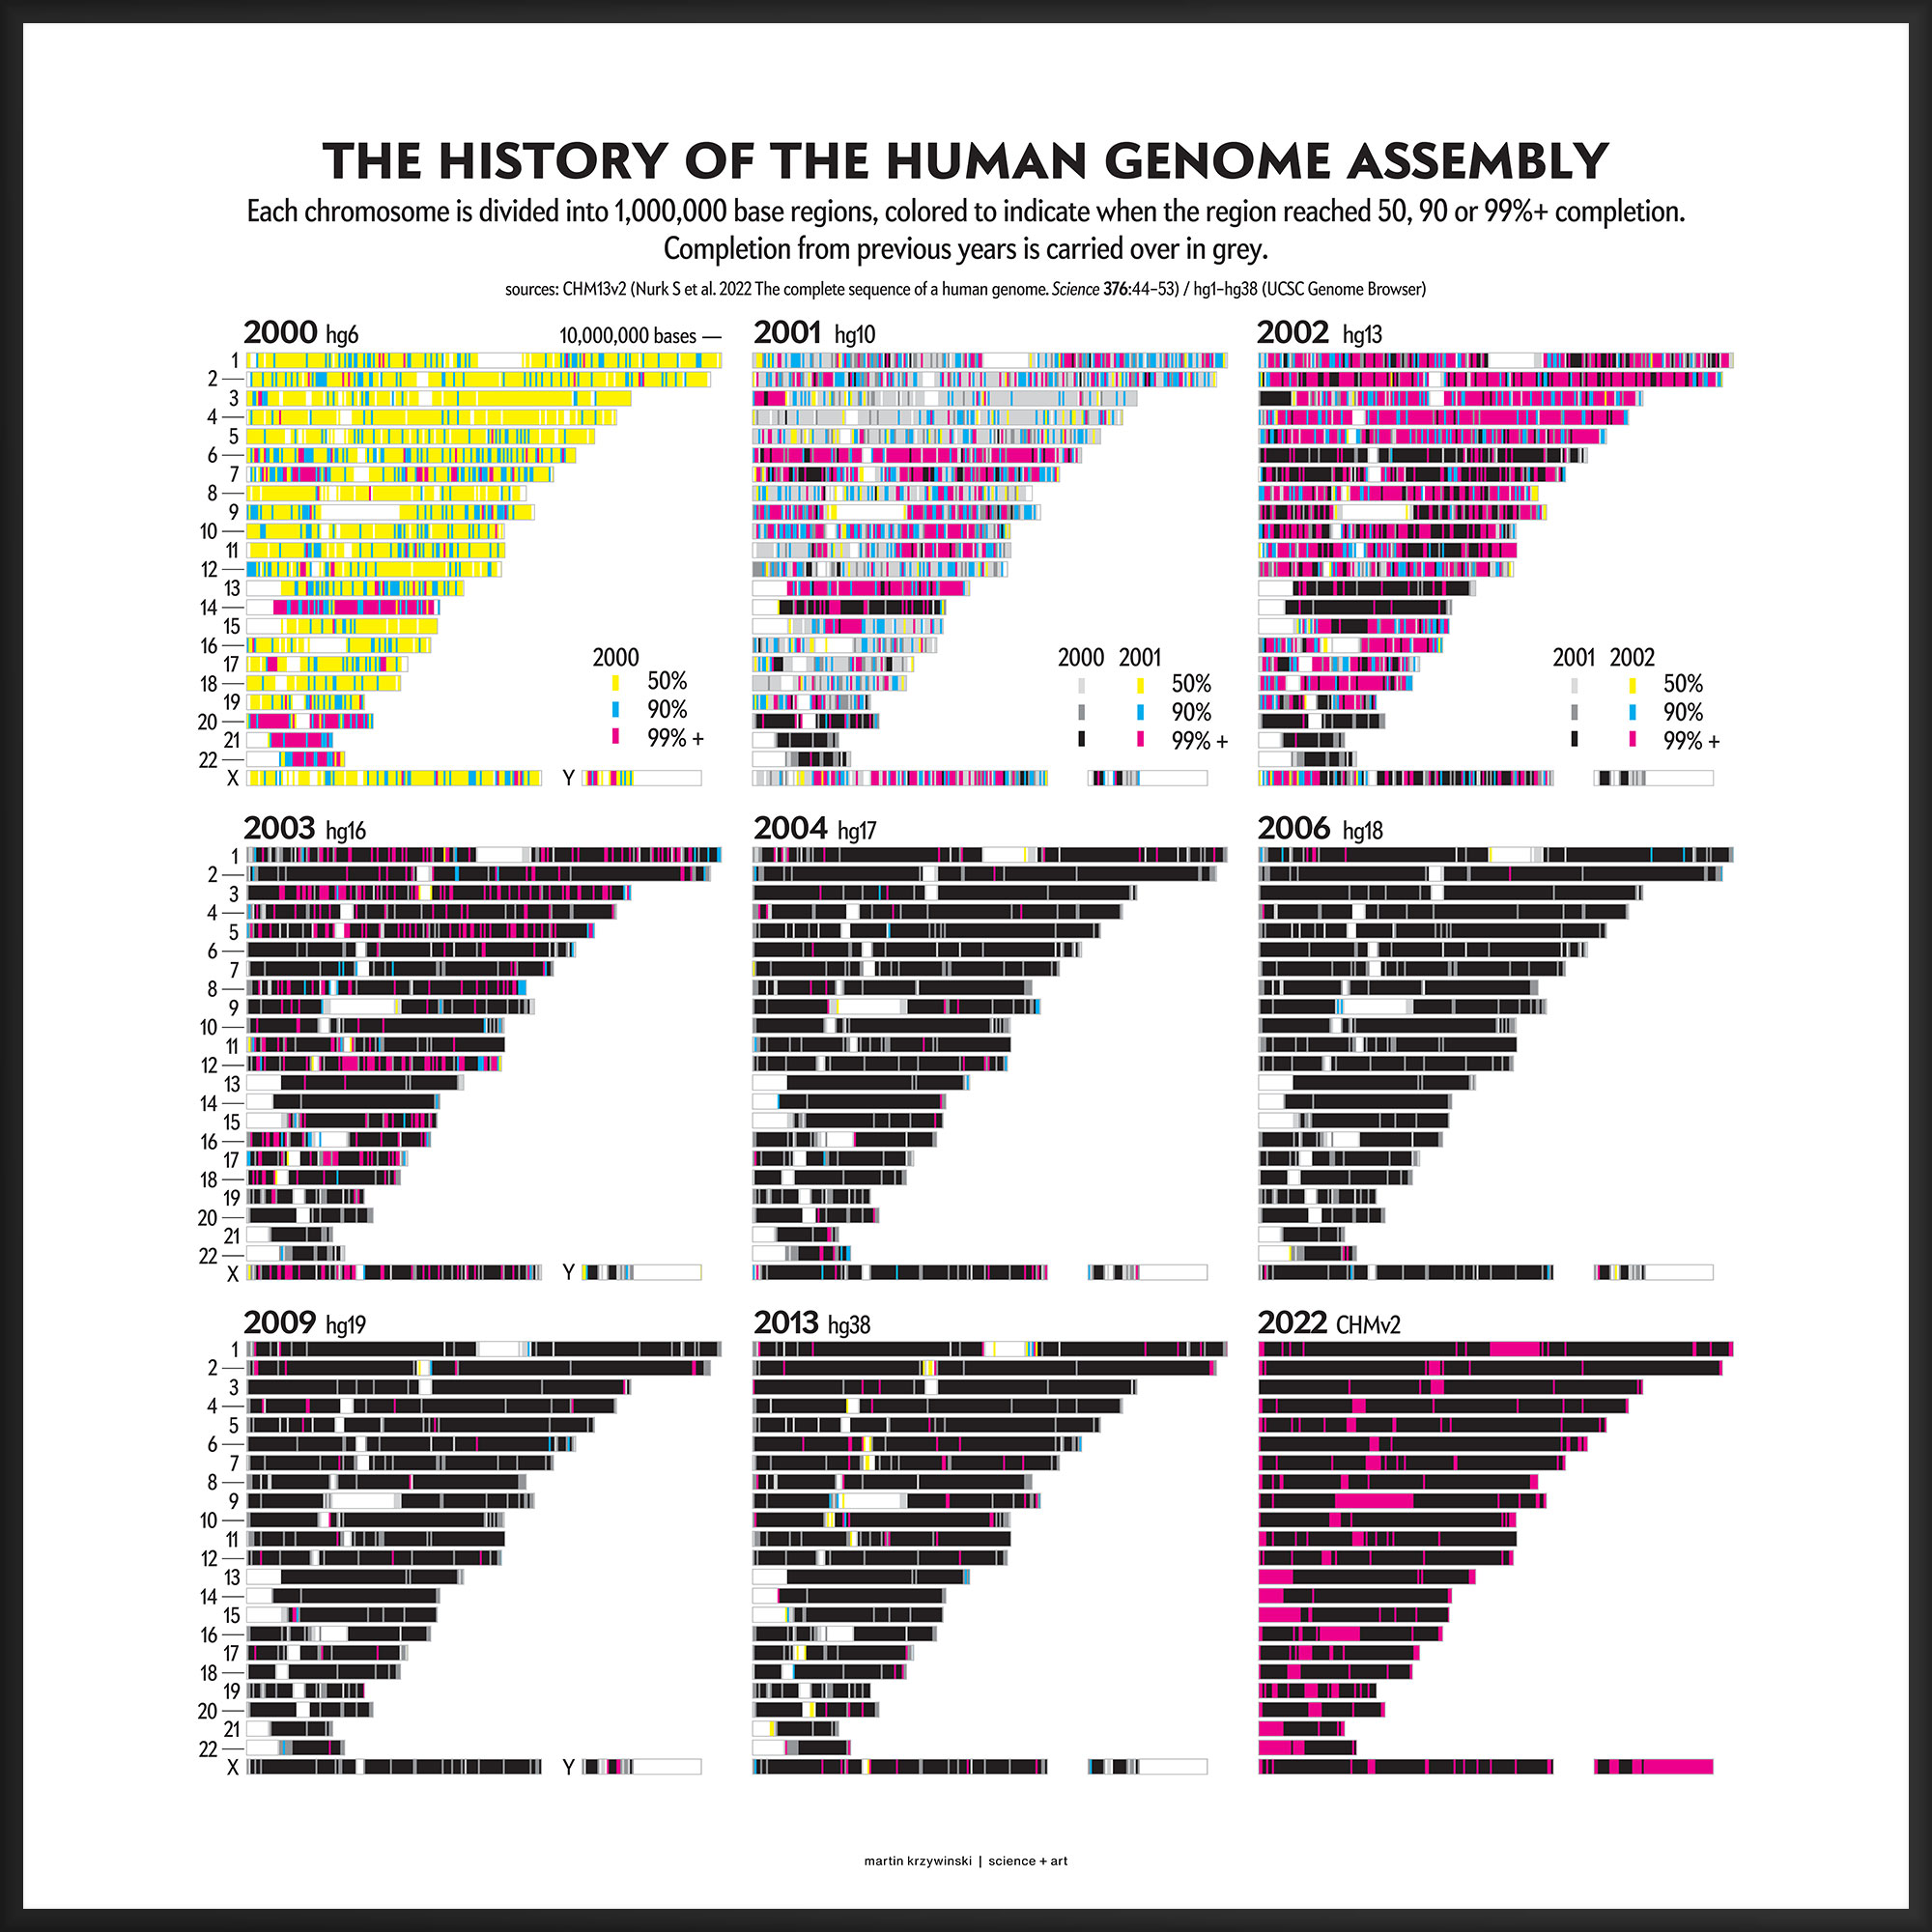 Year-by-year history of the human genome assembly (1Mb bins) by Martin Krzywinski